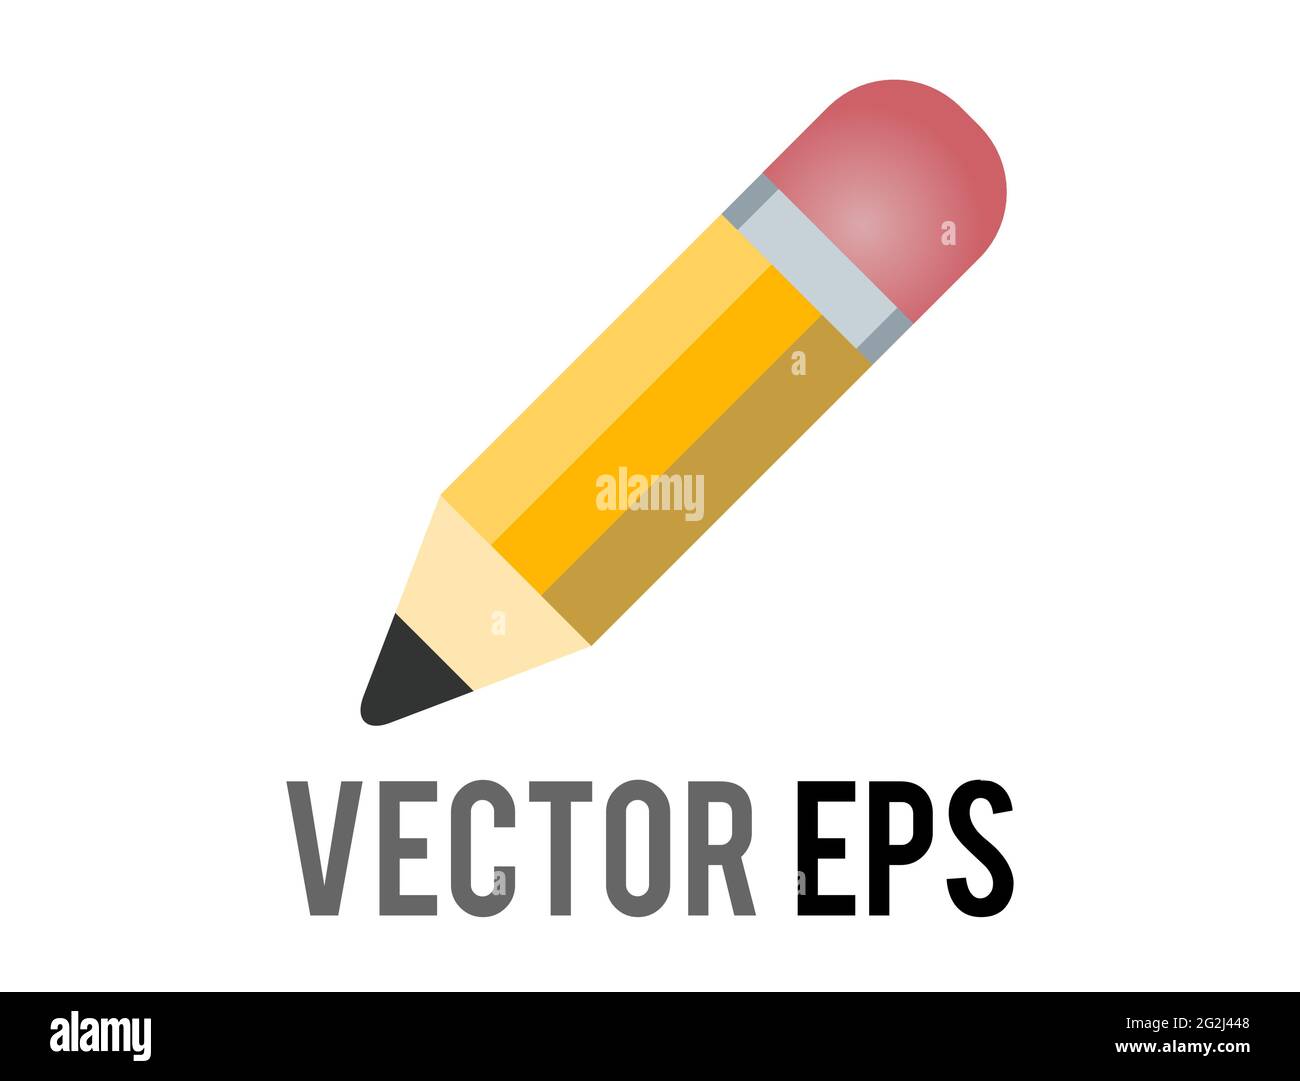 The isolated vector classic yellow pencil icon with sharpened tip, pink eraser, used for content concerning writing, drawing and schooling Stock Vector